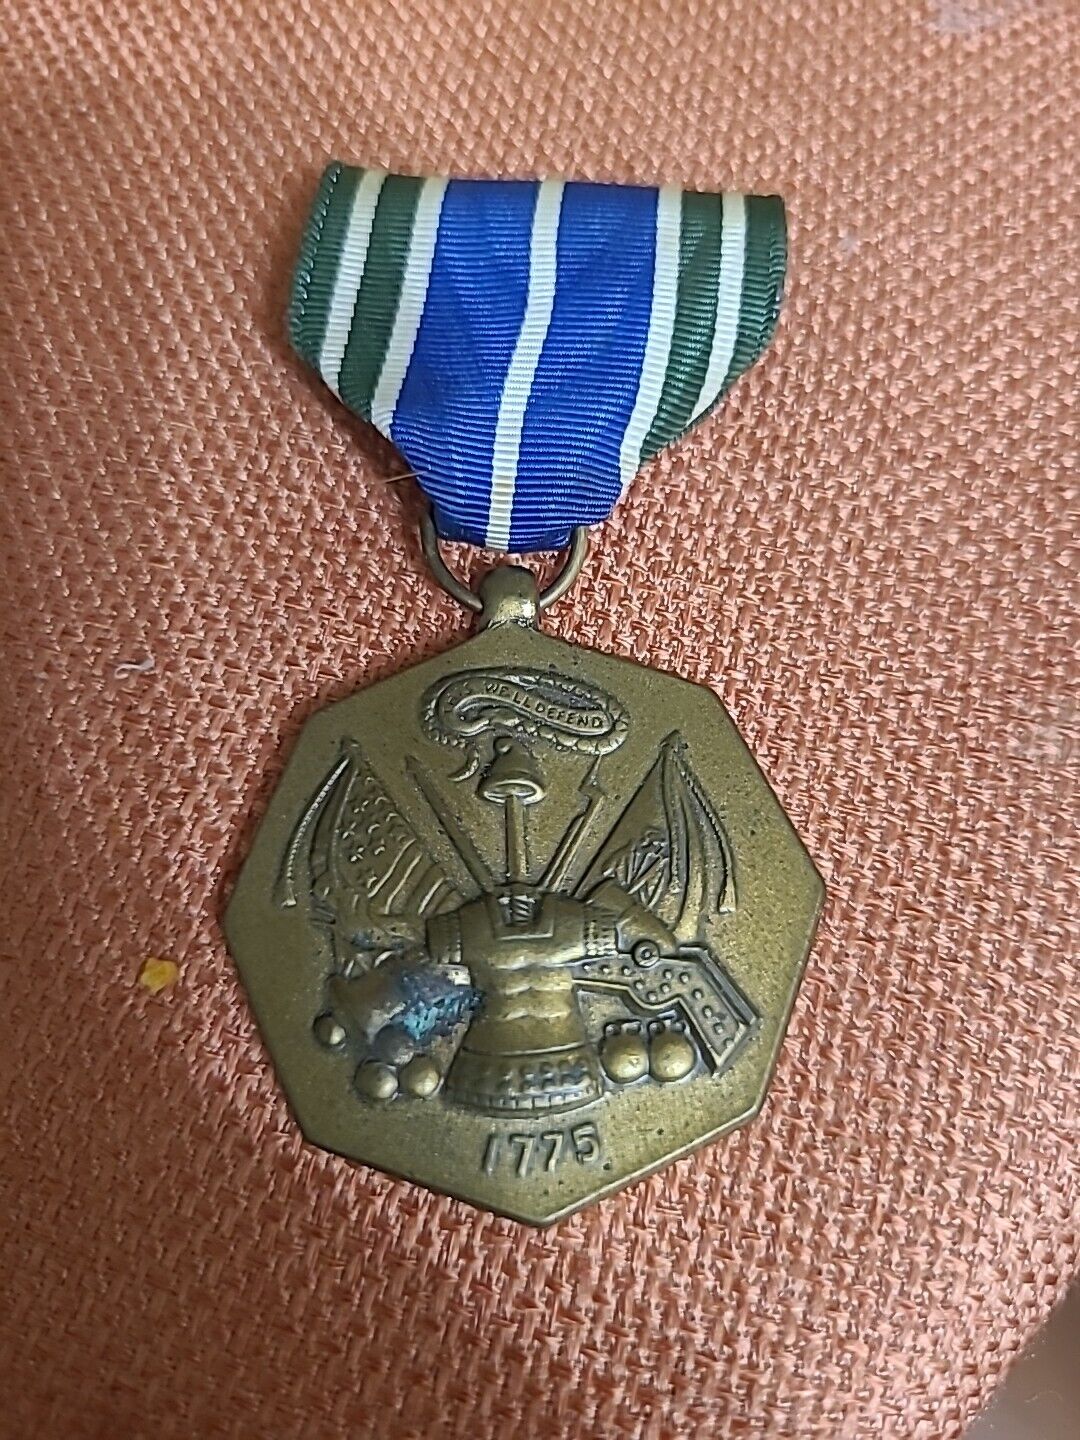 MILITARY ACHIEMENT MEDAL DATED 1775